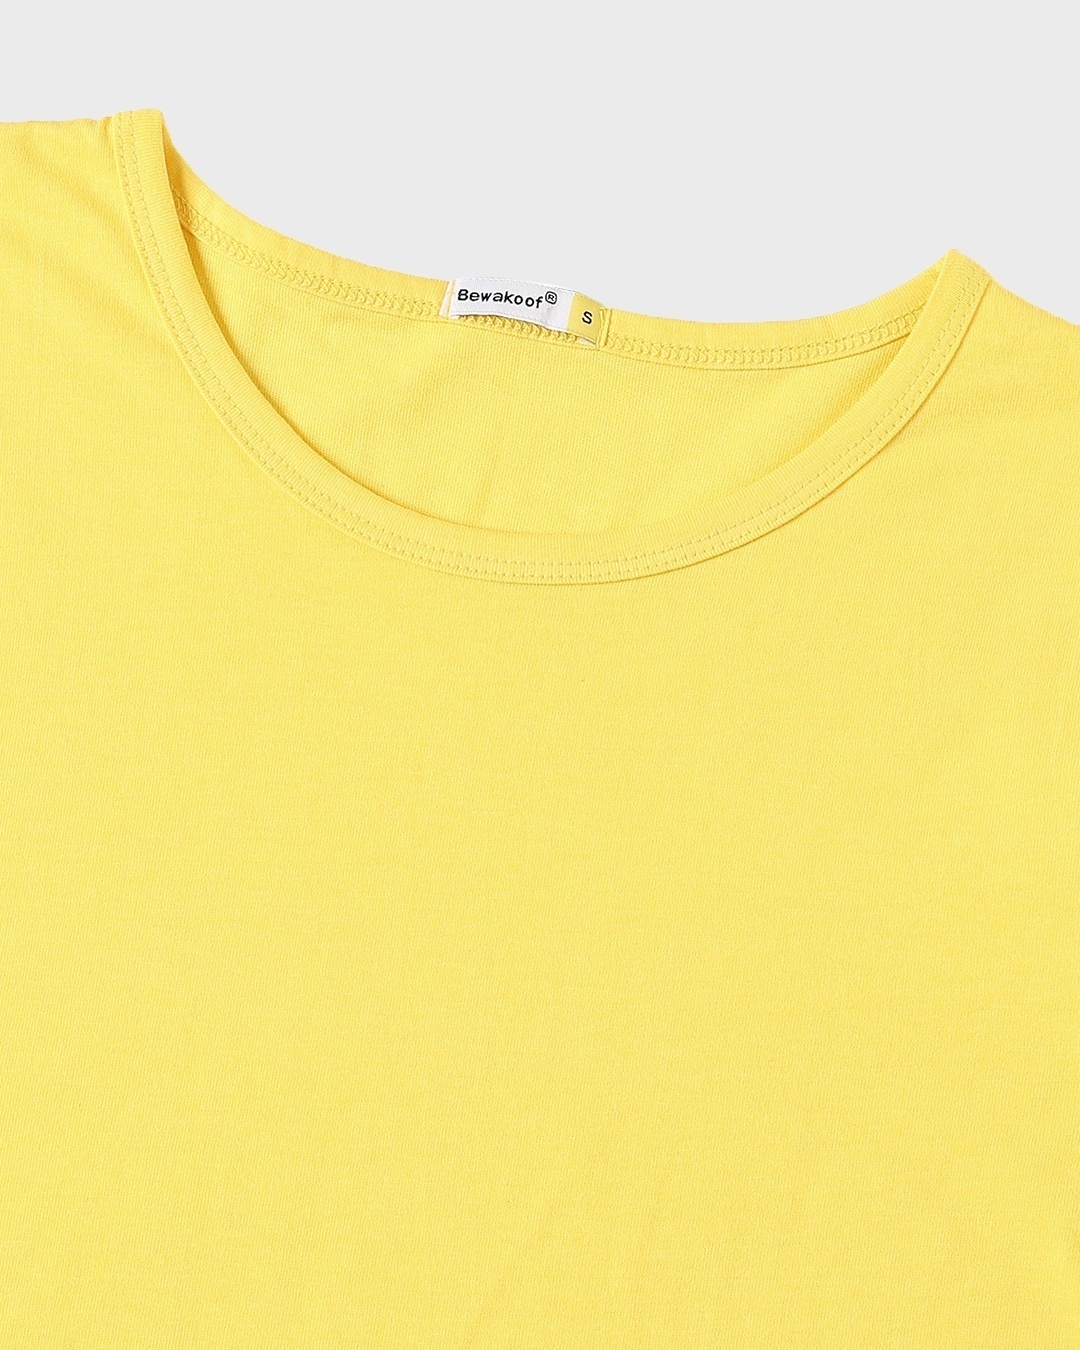 Shop Pineapple Yellow Round Neck 3/4th Sleeve T-Shirt